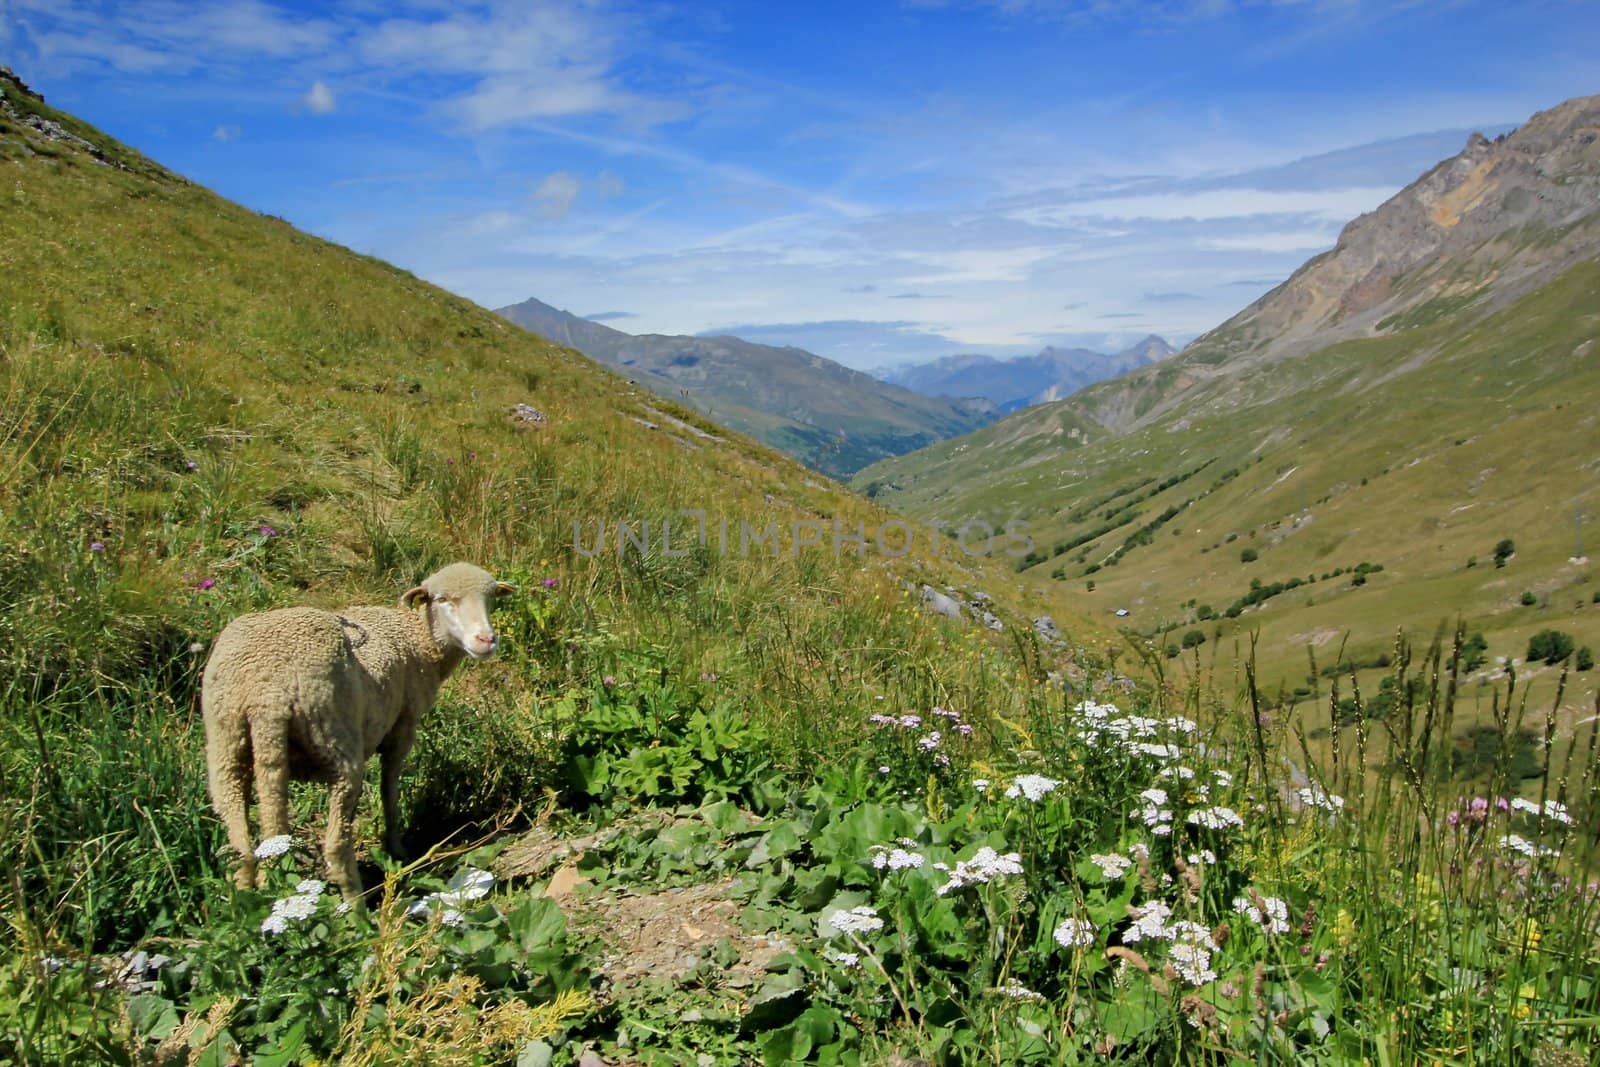 Landscape of the mountain with a white sheep, the rocks, grass and flowers at the Galibier pass, France, by summer